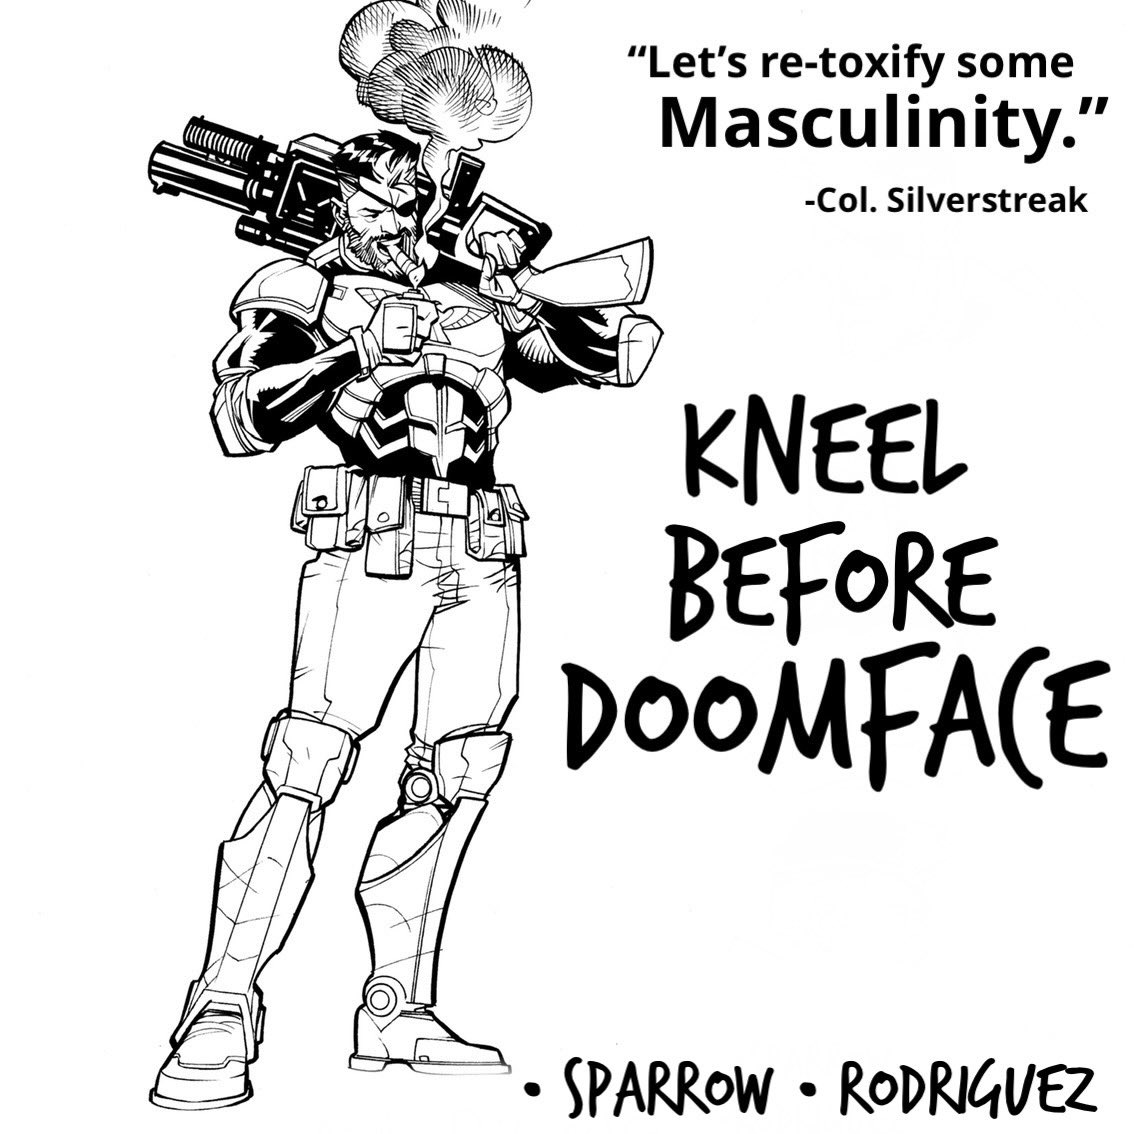 RE-TOXIFYING MASCULINITY, 2024. Sign up for mailing list/updates at Kneelbeforedoomface@gmail.com! #kneelbeforedoomface #doomfaceiscoming #doomface #LexiVega #KidNotorious #IggytheInflatableIguana #silverstreak #colonelsilverstreak #comicbooks #crowdfunding #crowdfundingcomics